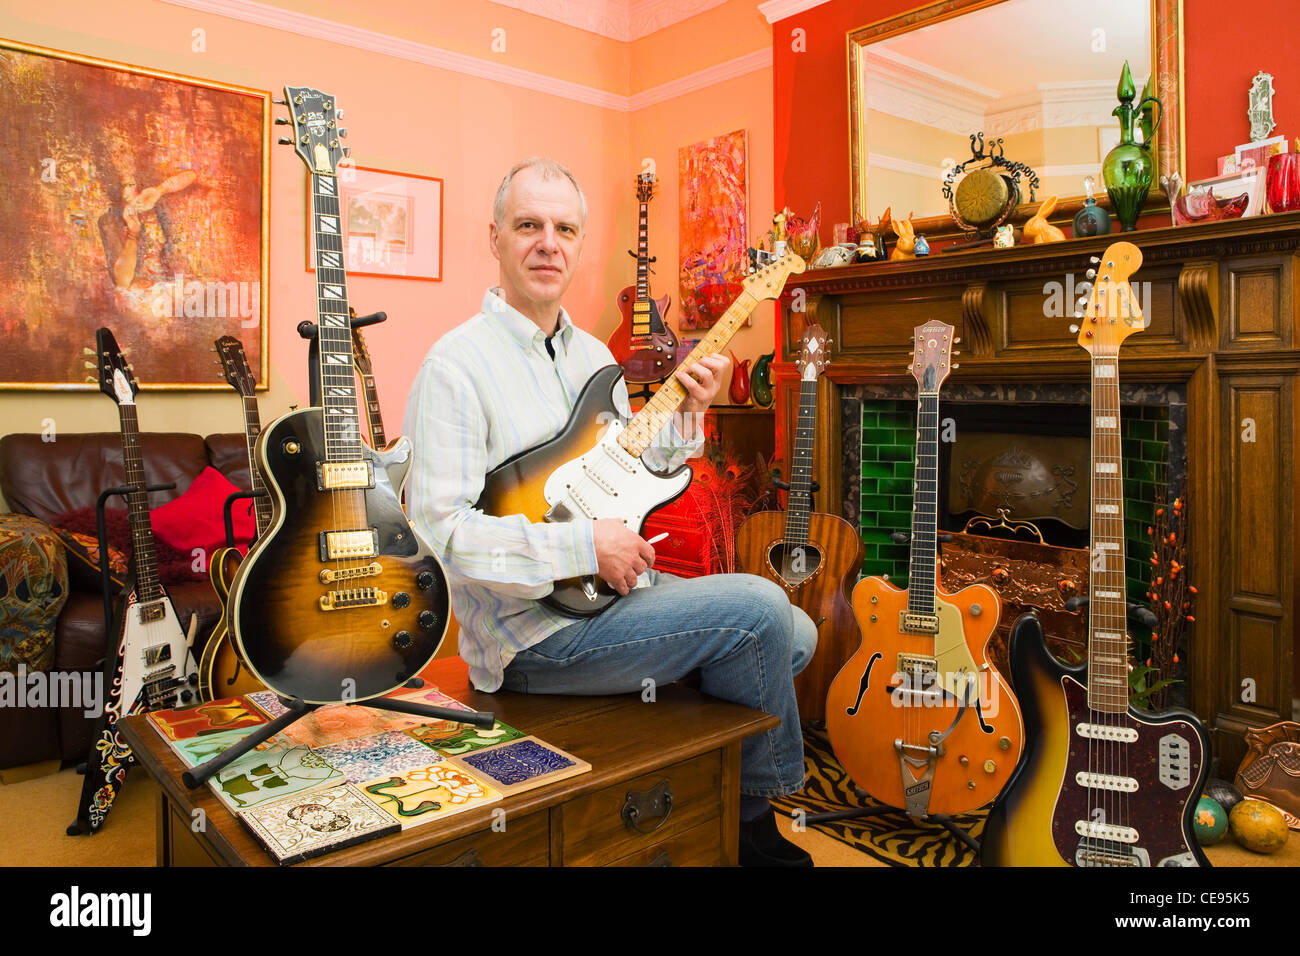 David Brewis of Rock Stars Guitars at home with some of his collection Stock Photo